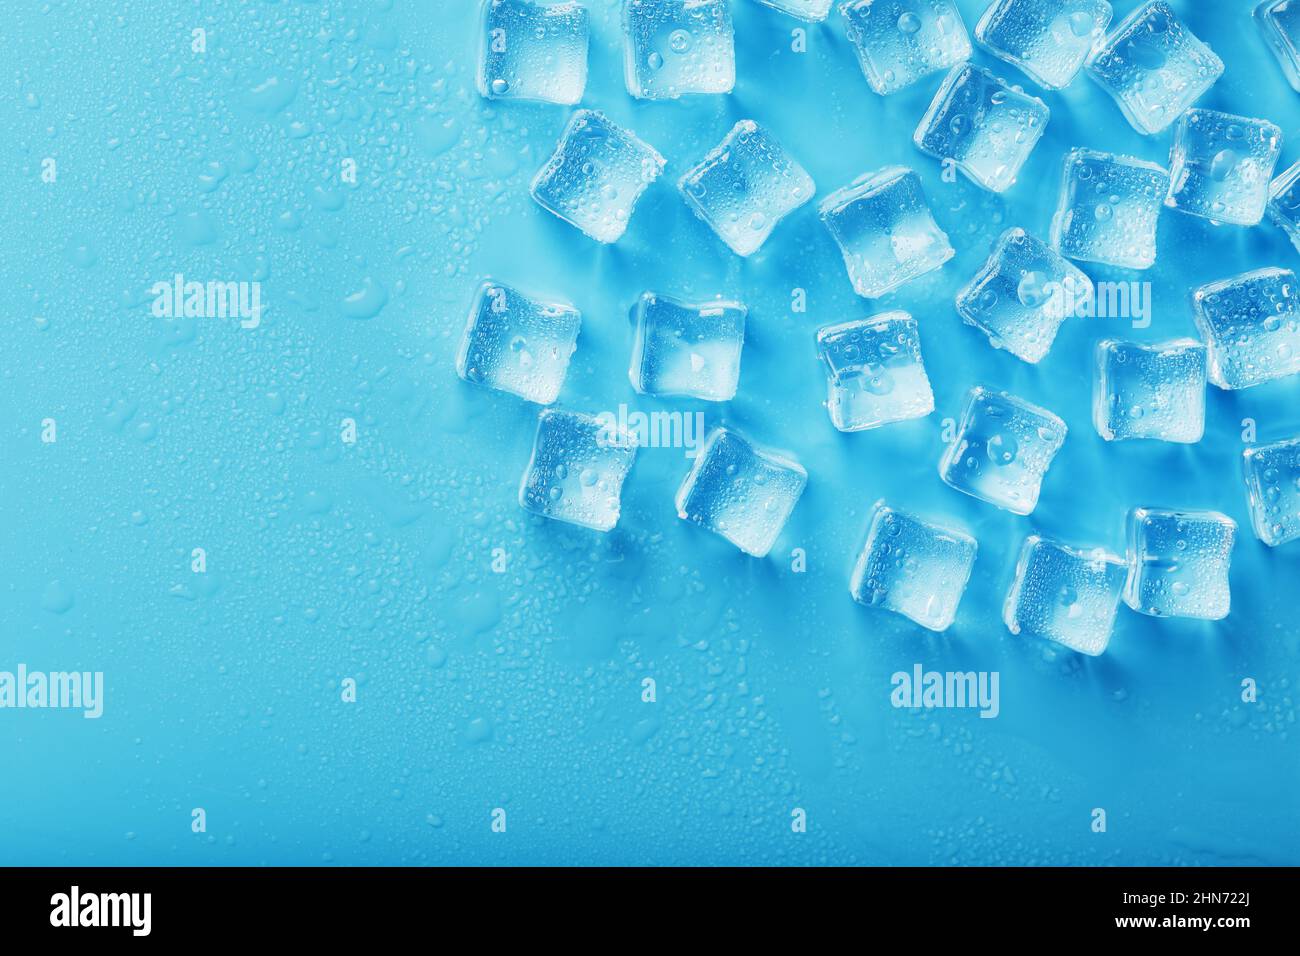 https://c8.alamy.com/comp/2HN722J/ice-cubes-with-water-drops-scattered-on-a-blue-background-top-view-2HN722J.jpg